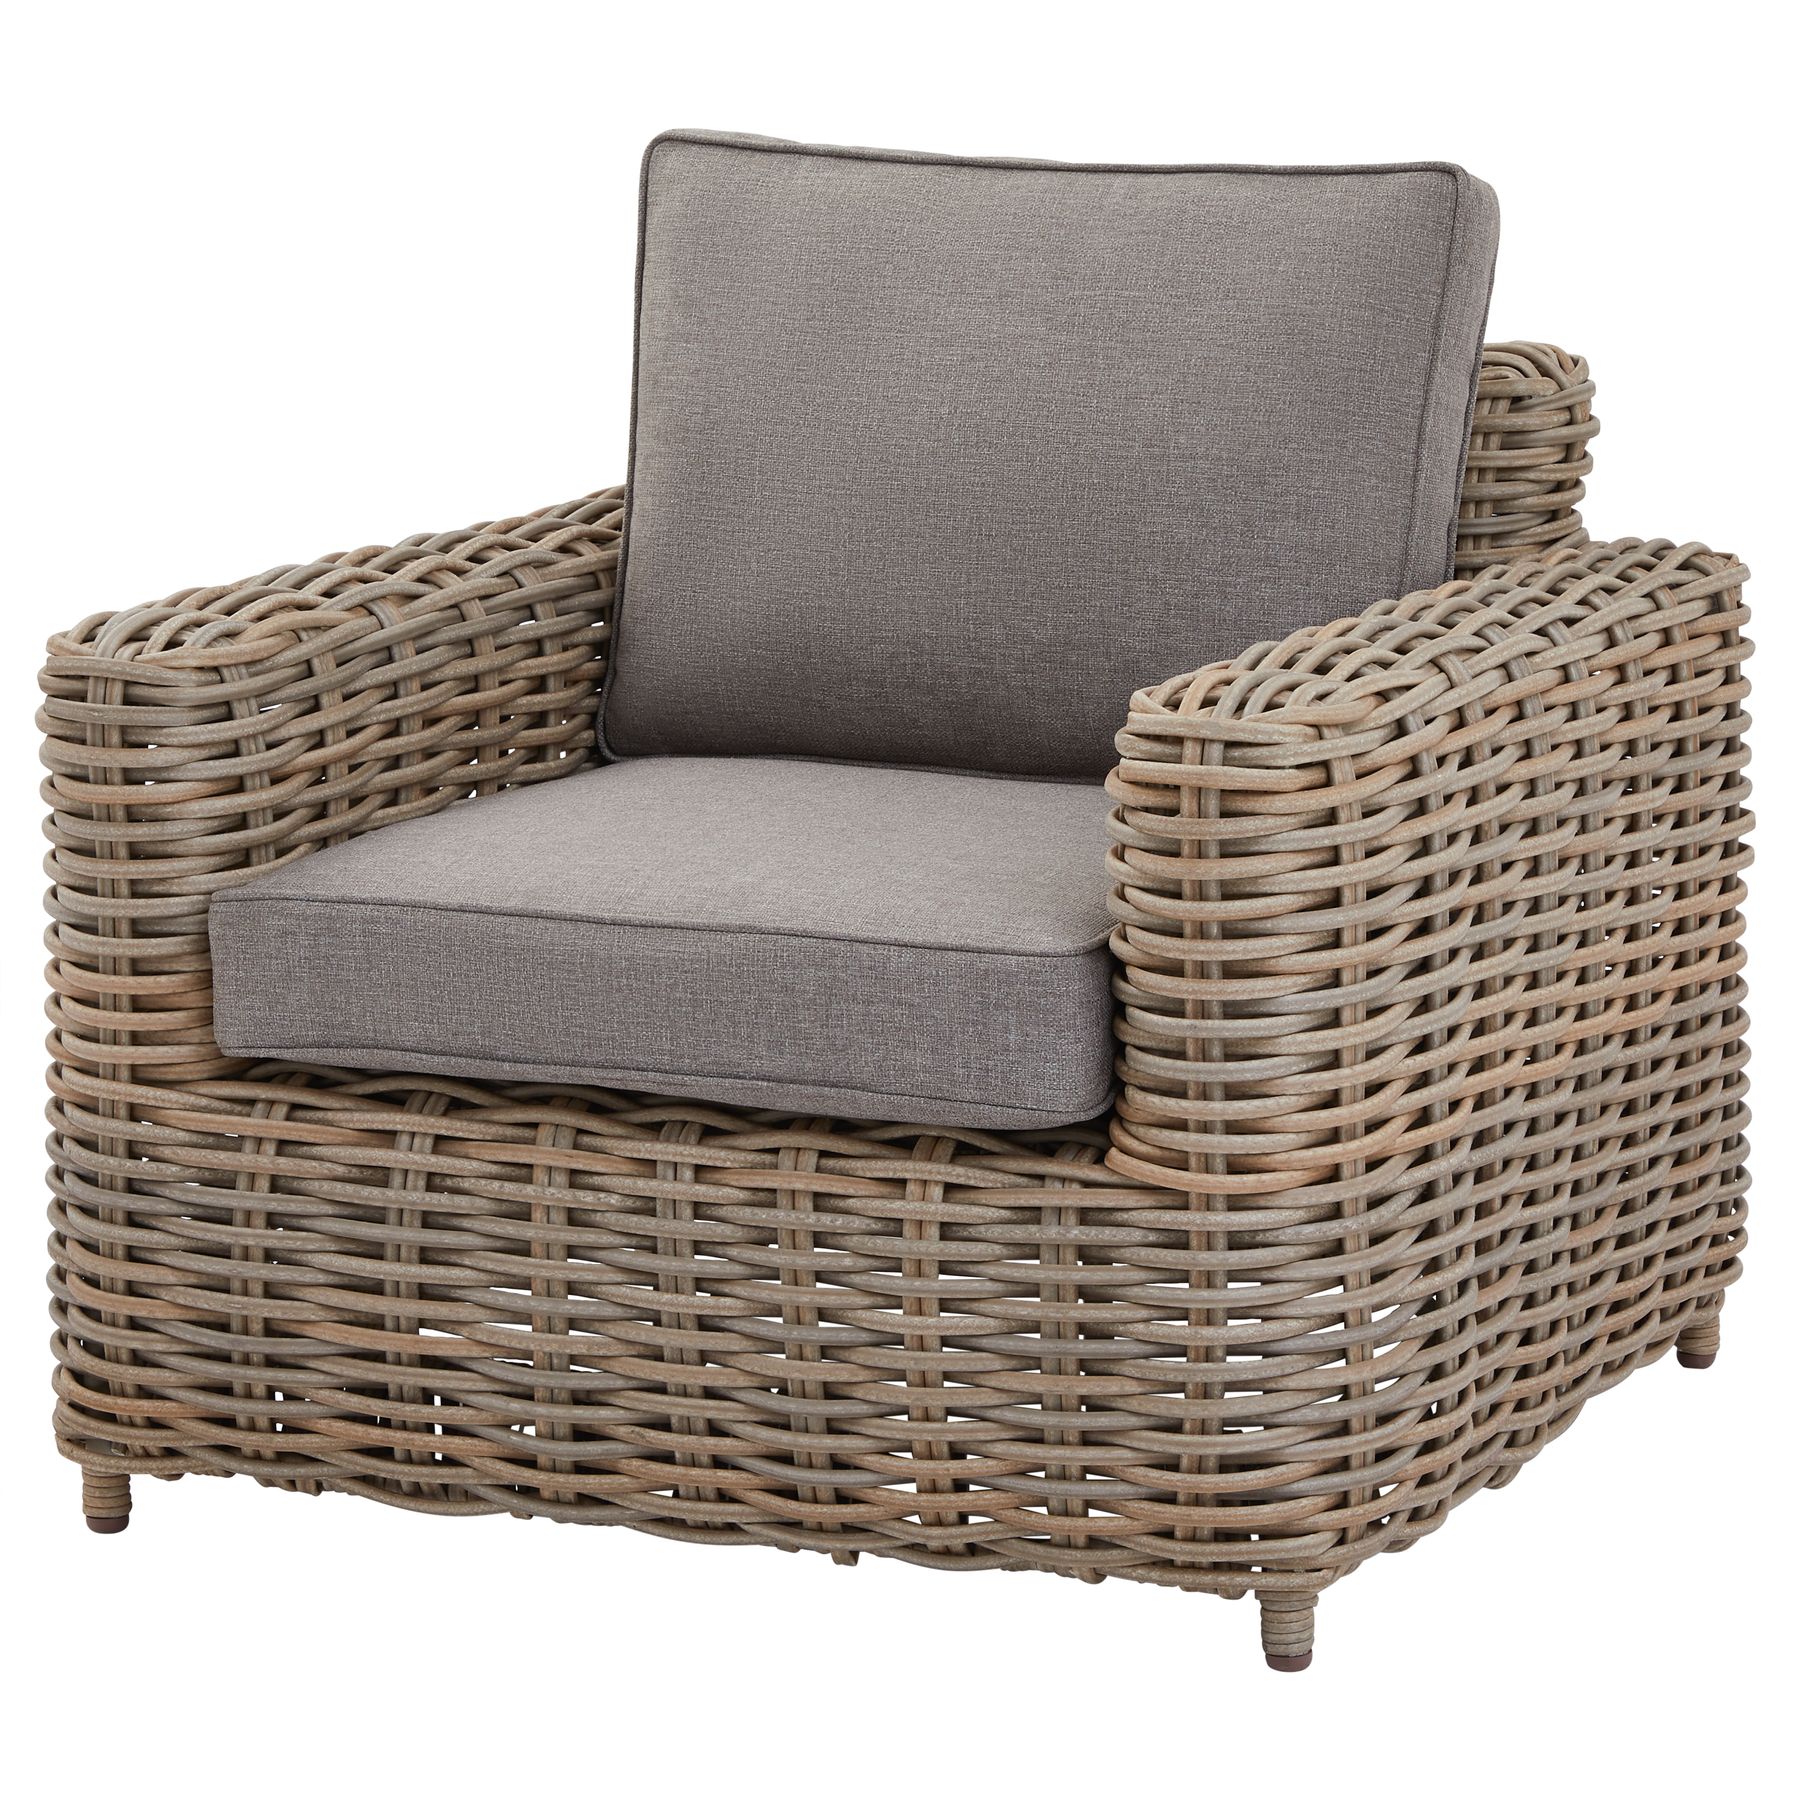 Amalfi Collection Outdoor Five Seater Set - Image 2